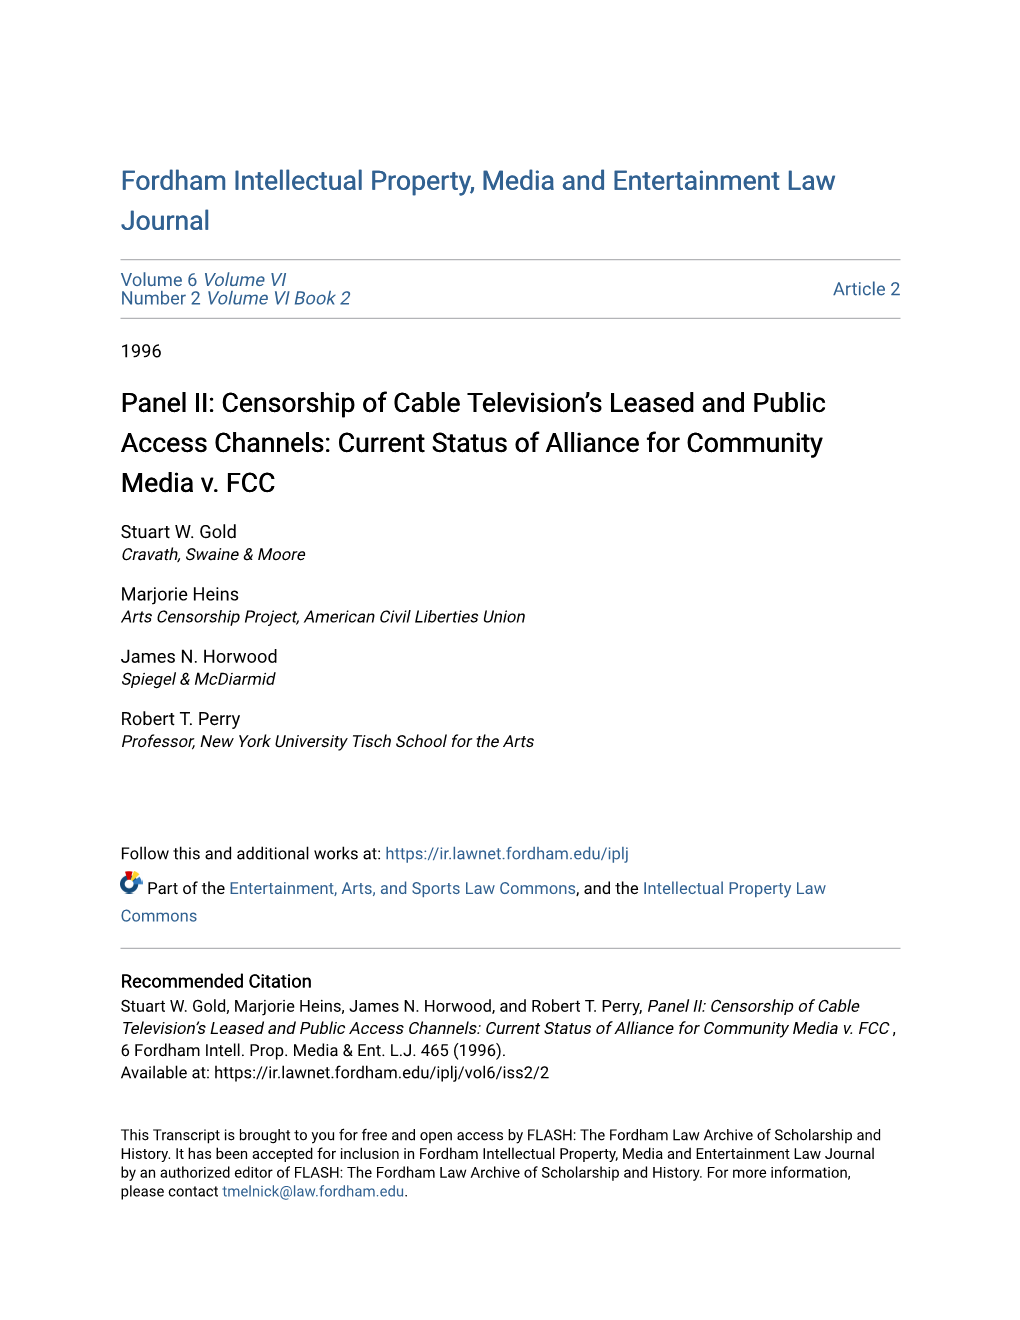 Censorship of Cable Television's Leased and Public Access Channels: Current Status of Alliance for Community Media V